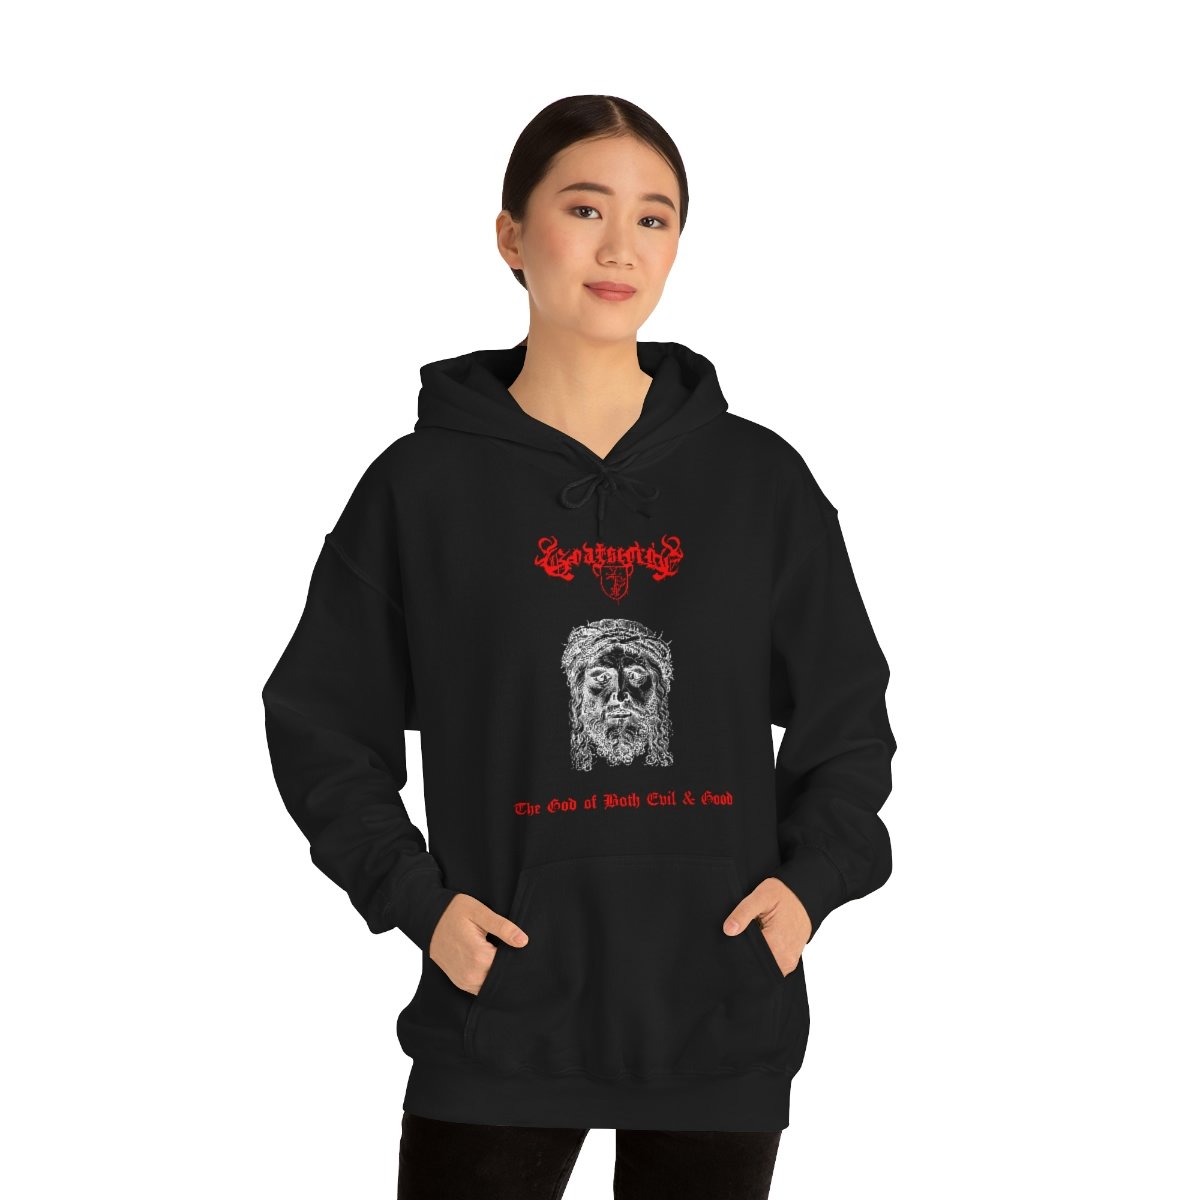 Goatscorge – The God of Both Evil and Good Pullover Hooded Sweatshirt